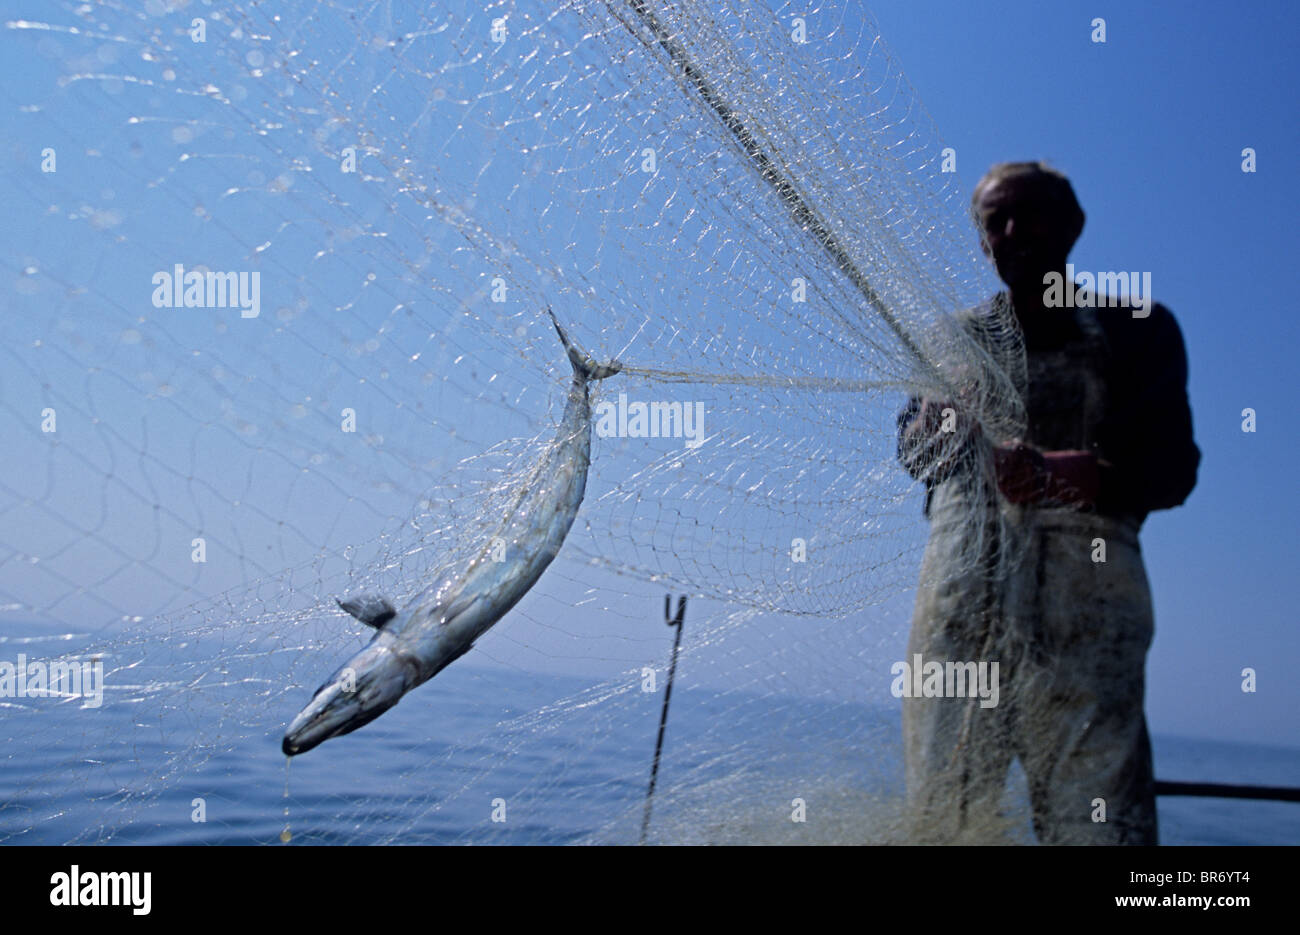 Atlantic mackerel {Scomber scombrus} caught in drift net, being hauled in by fisherman at a fishery on the English Channel, Hast Stock Photo